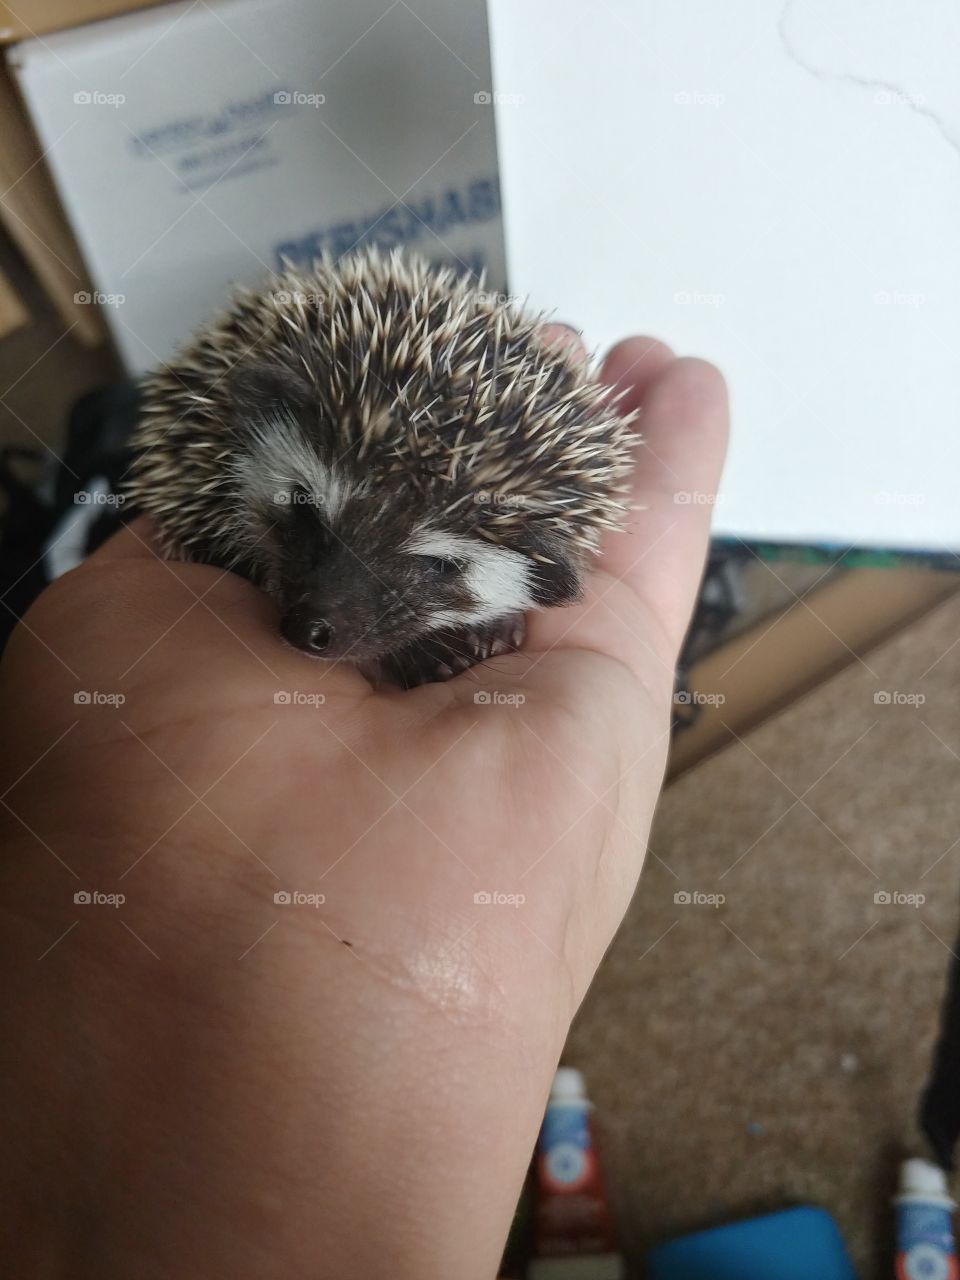 Baby Hedgehog Discovery